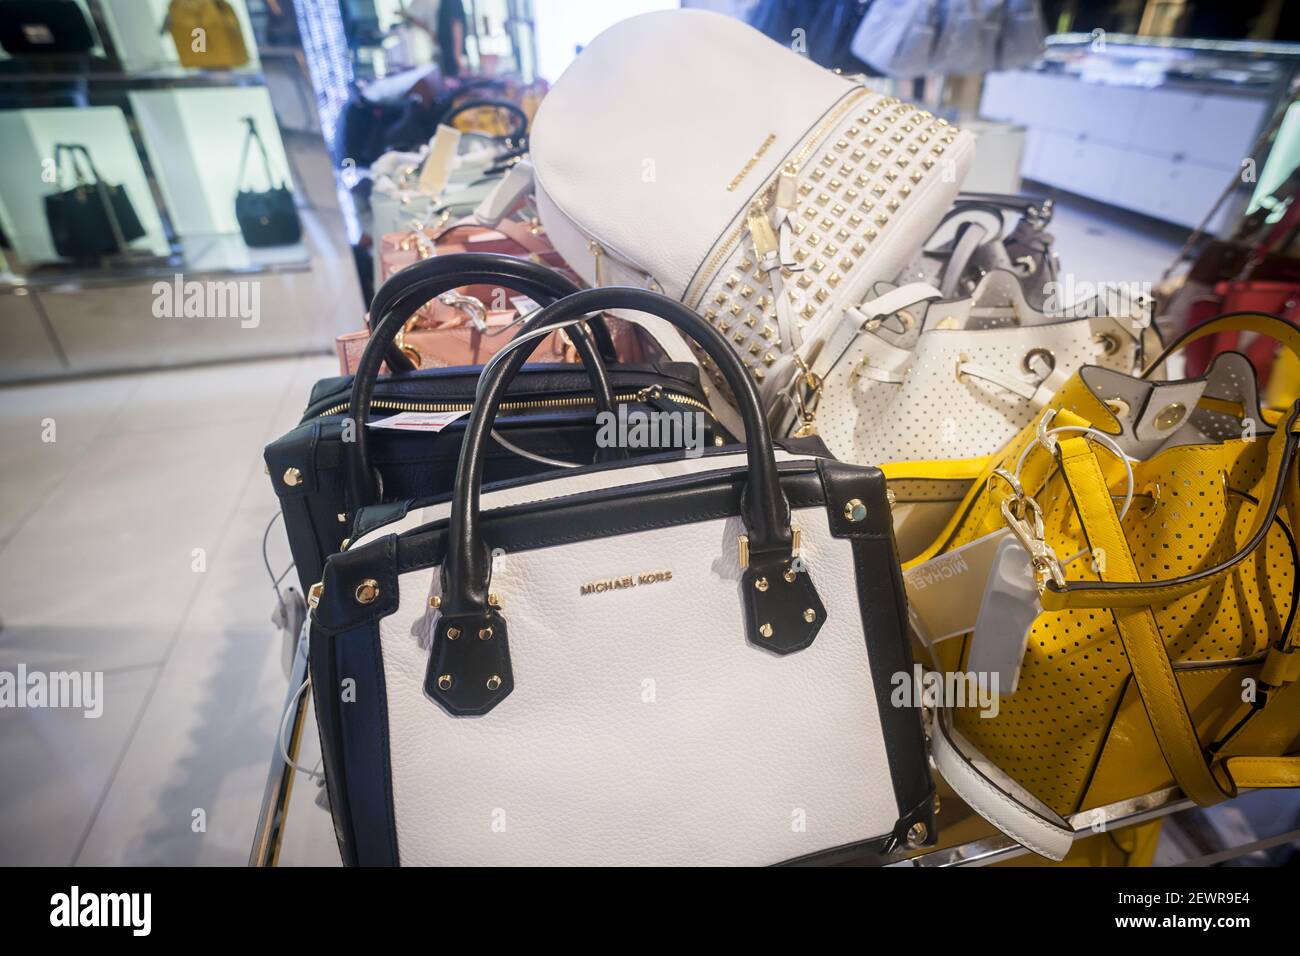 Handbags and accessories on display at the Michael Kors boutique within  Macy's in New York on Tuesday, May 31, 2016. Michael Kors is scheduled to  report fiscal third-quarter earnings and revenue prior